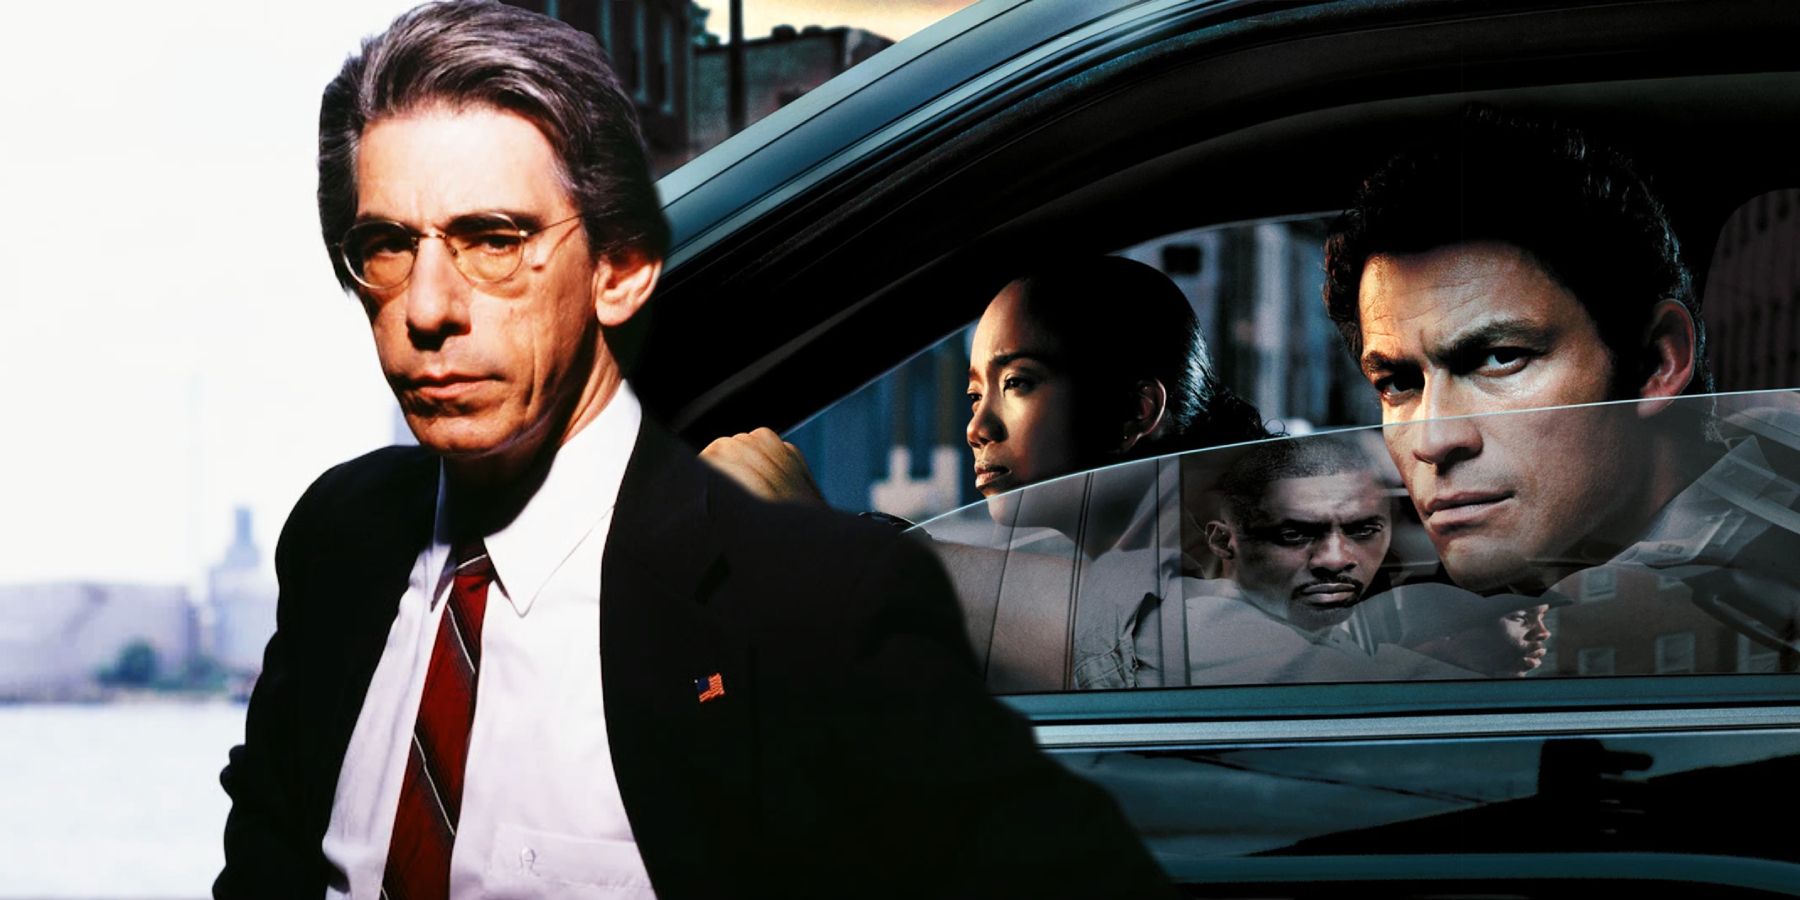 Richard Belzer as John Munch and promotional art for The Wire season 3